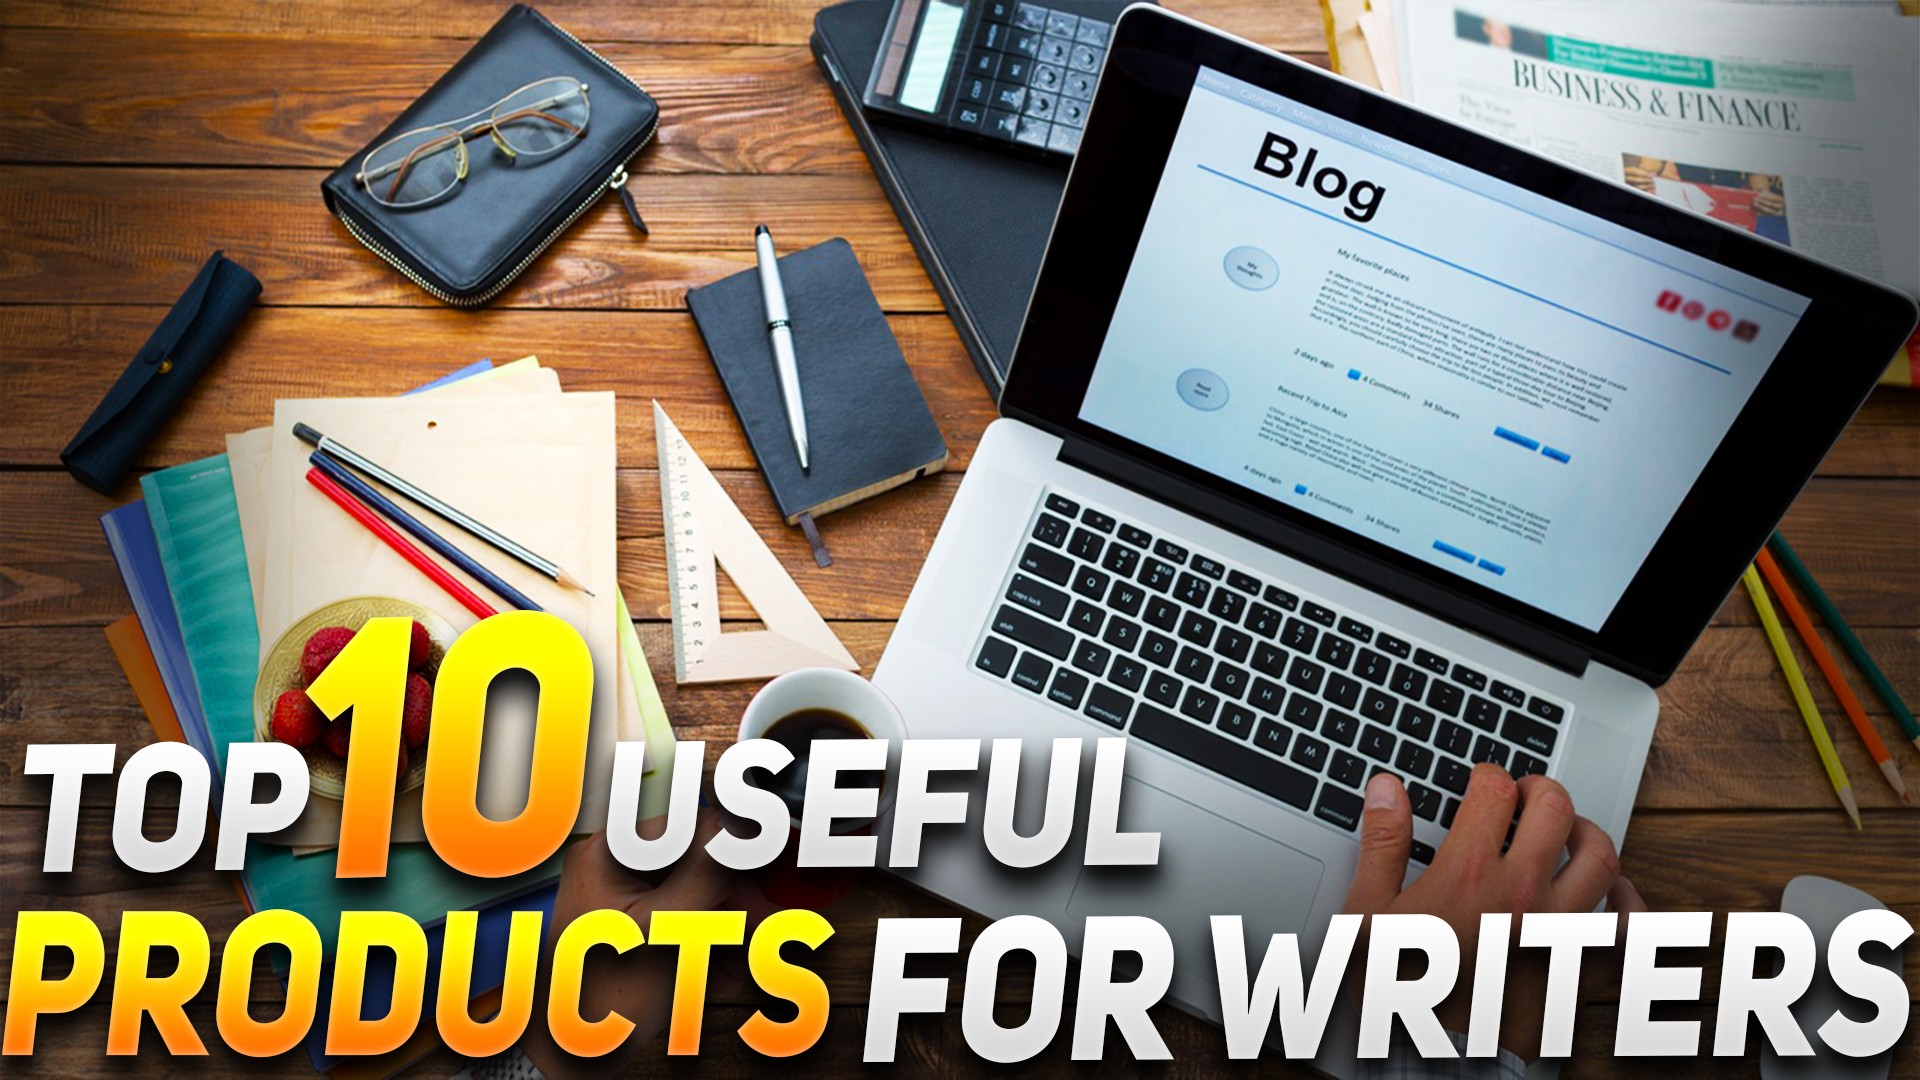 Top 10 Useful Products for Writers